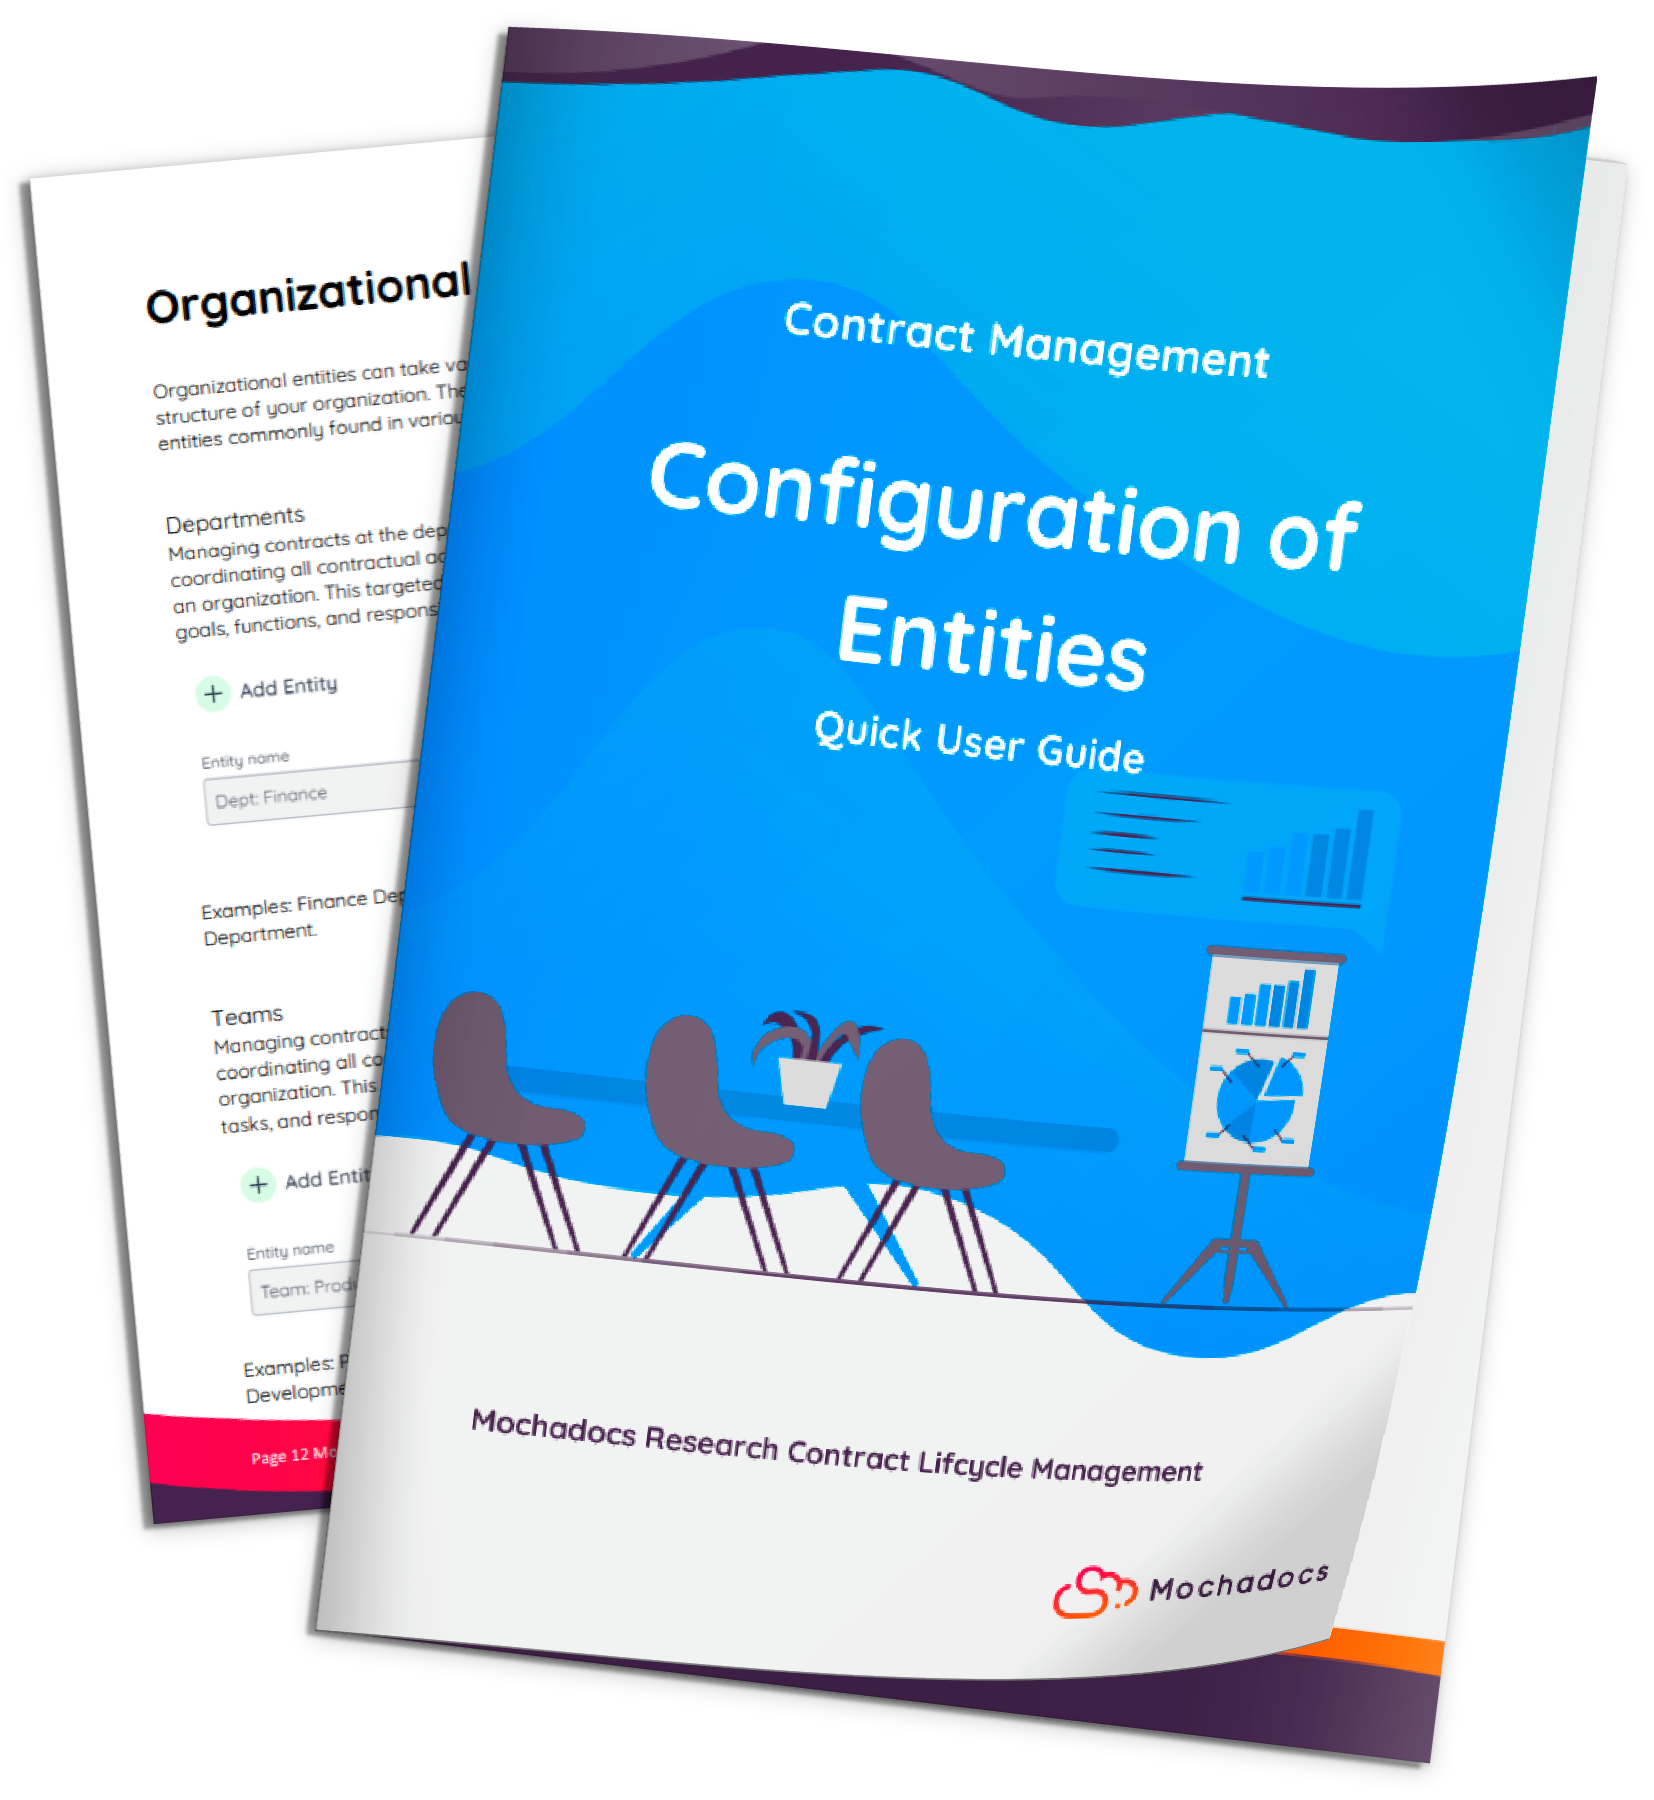 Quick User Guide | Mochadocs | Configuration of Entities